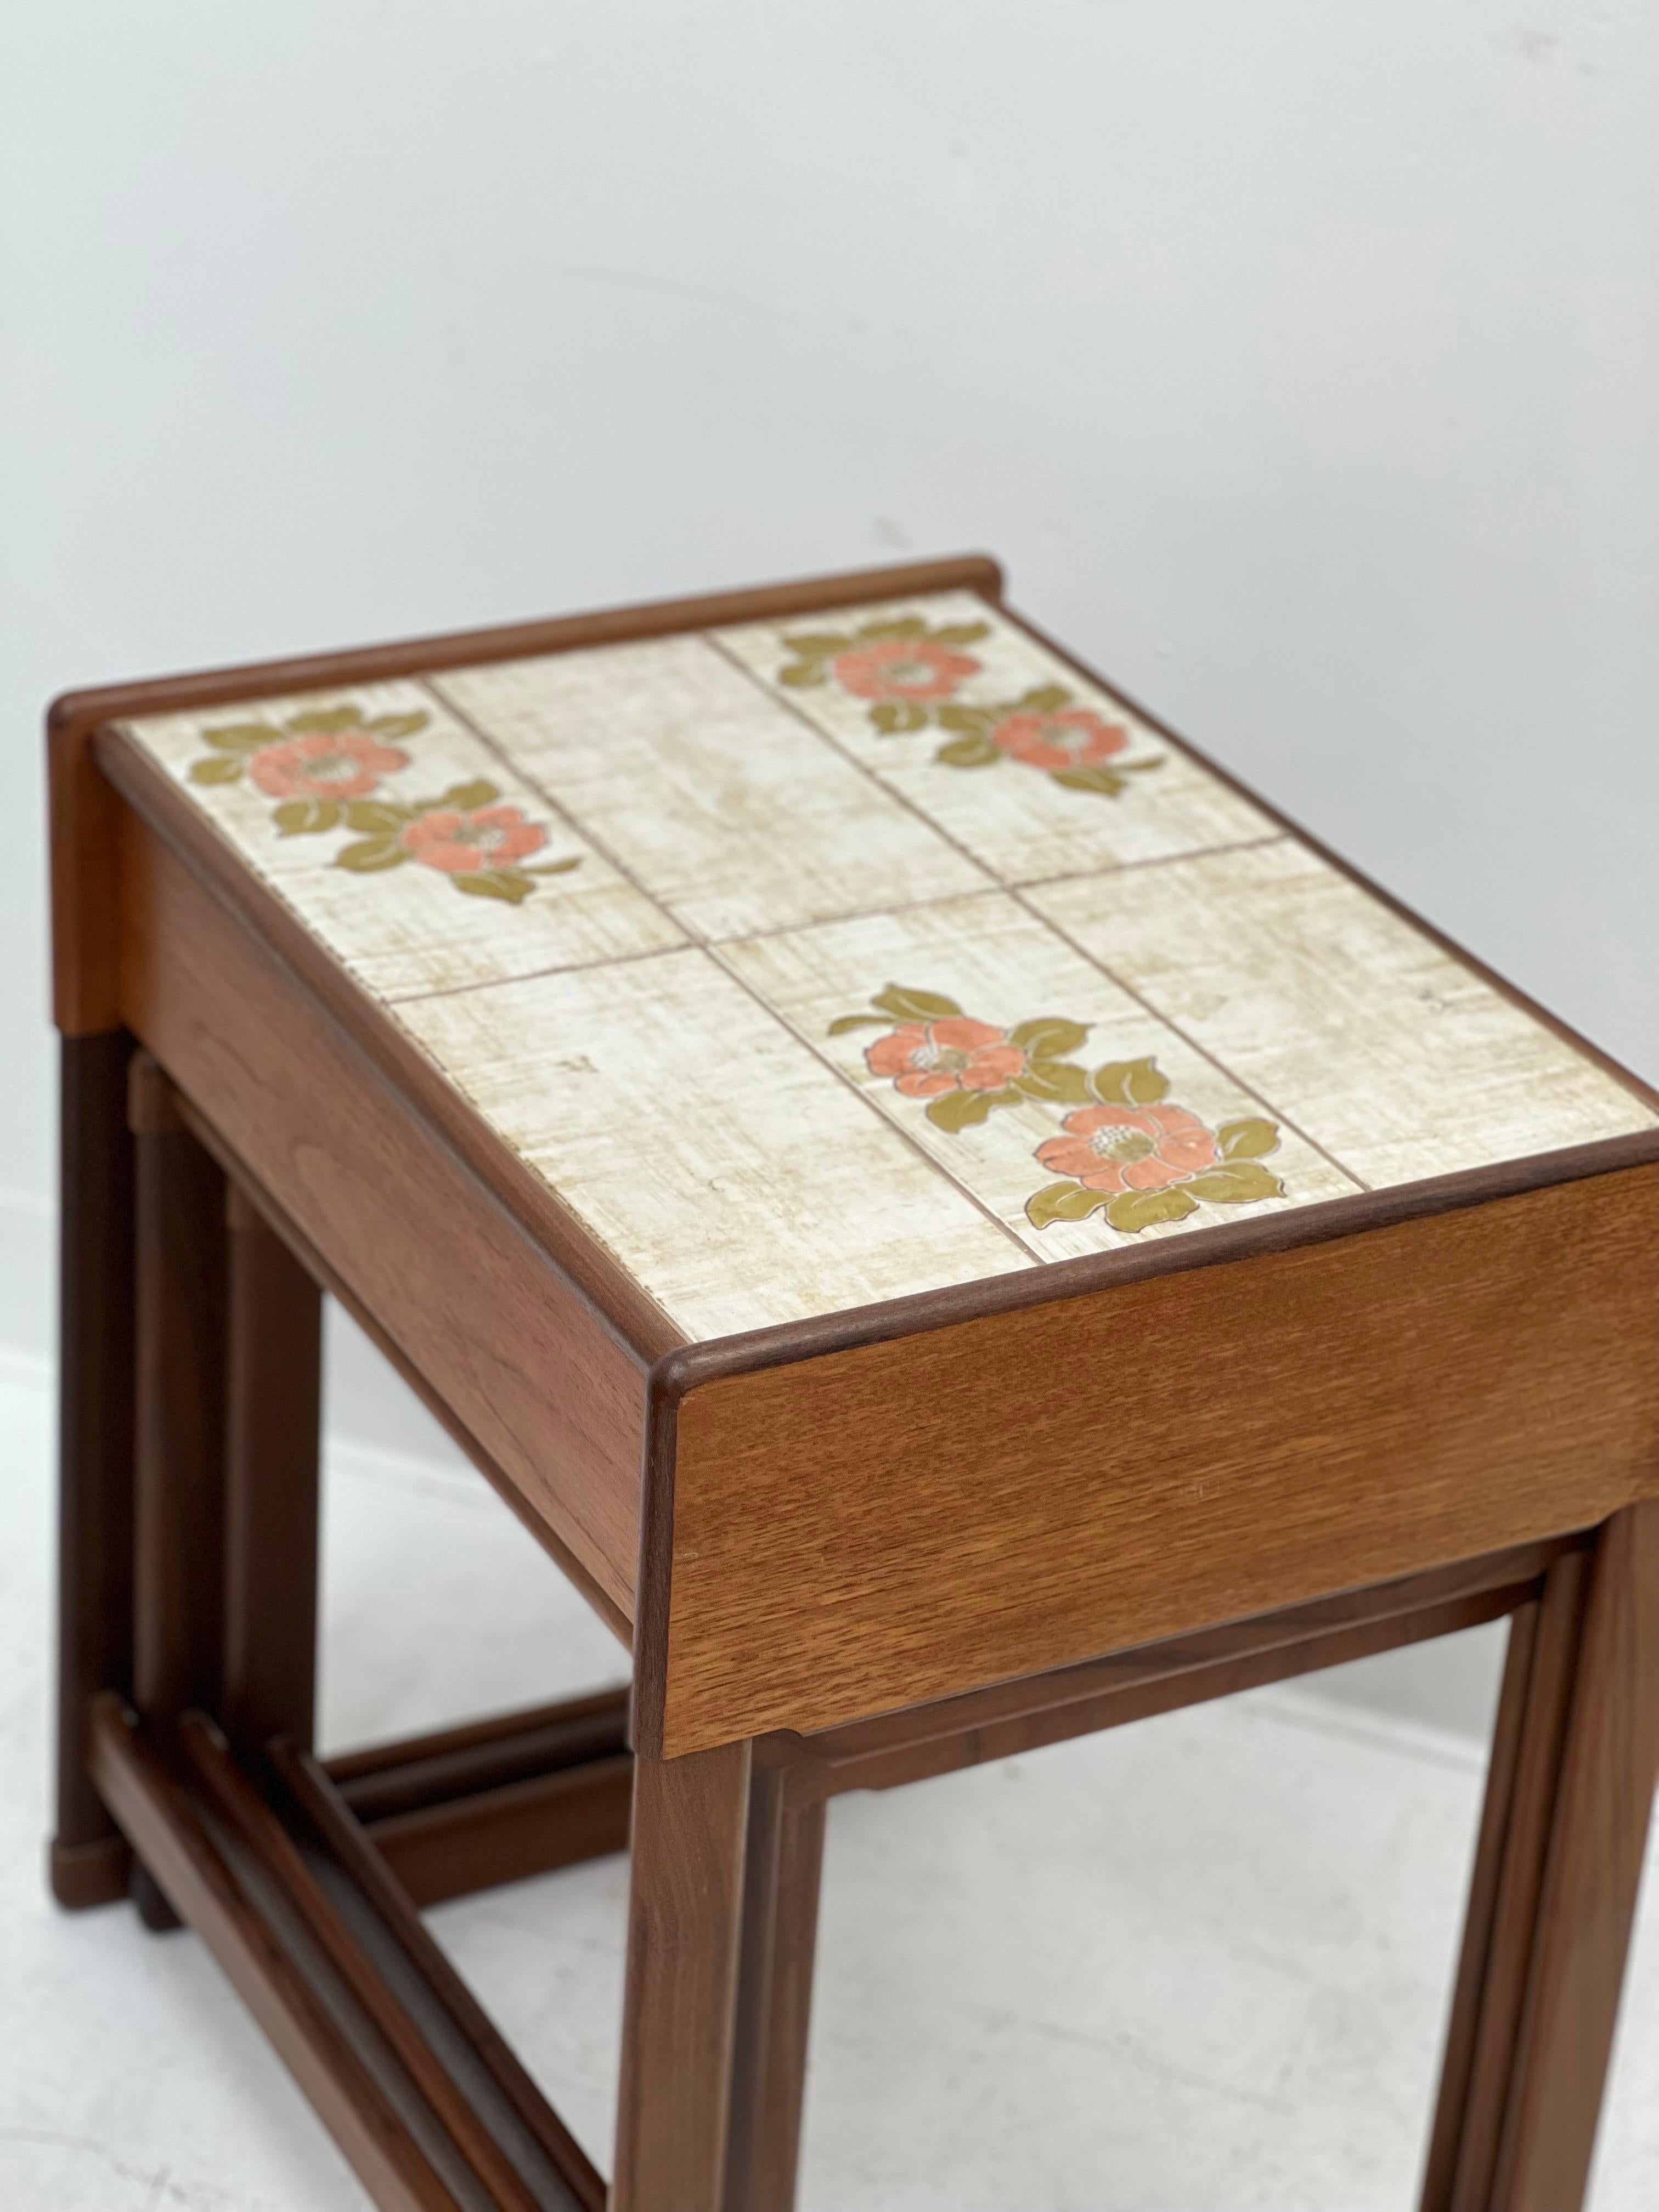 Imported solid wood teak Danish modern tile top nesting table. In great vintage condition.